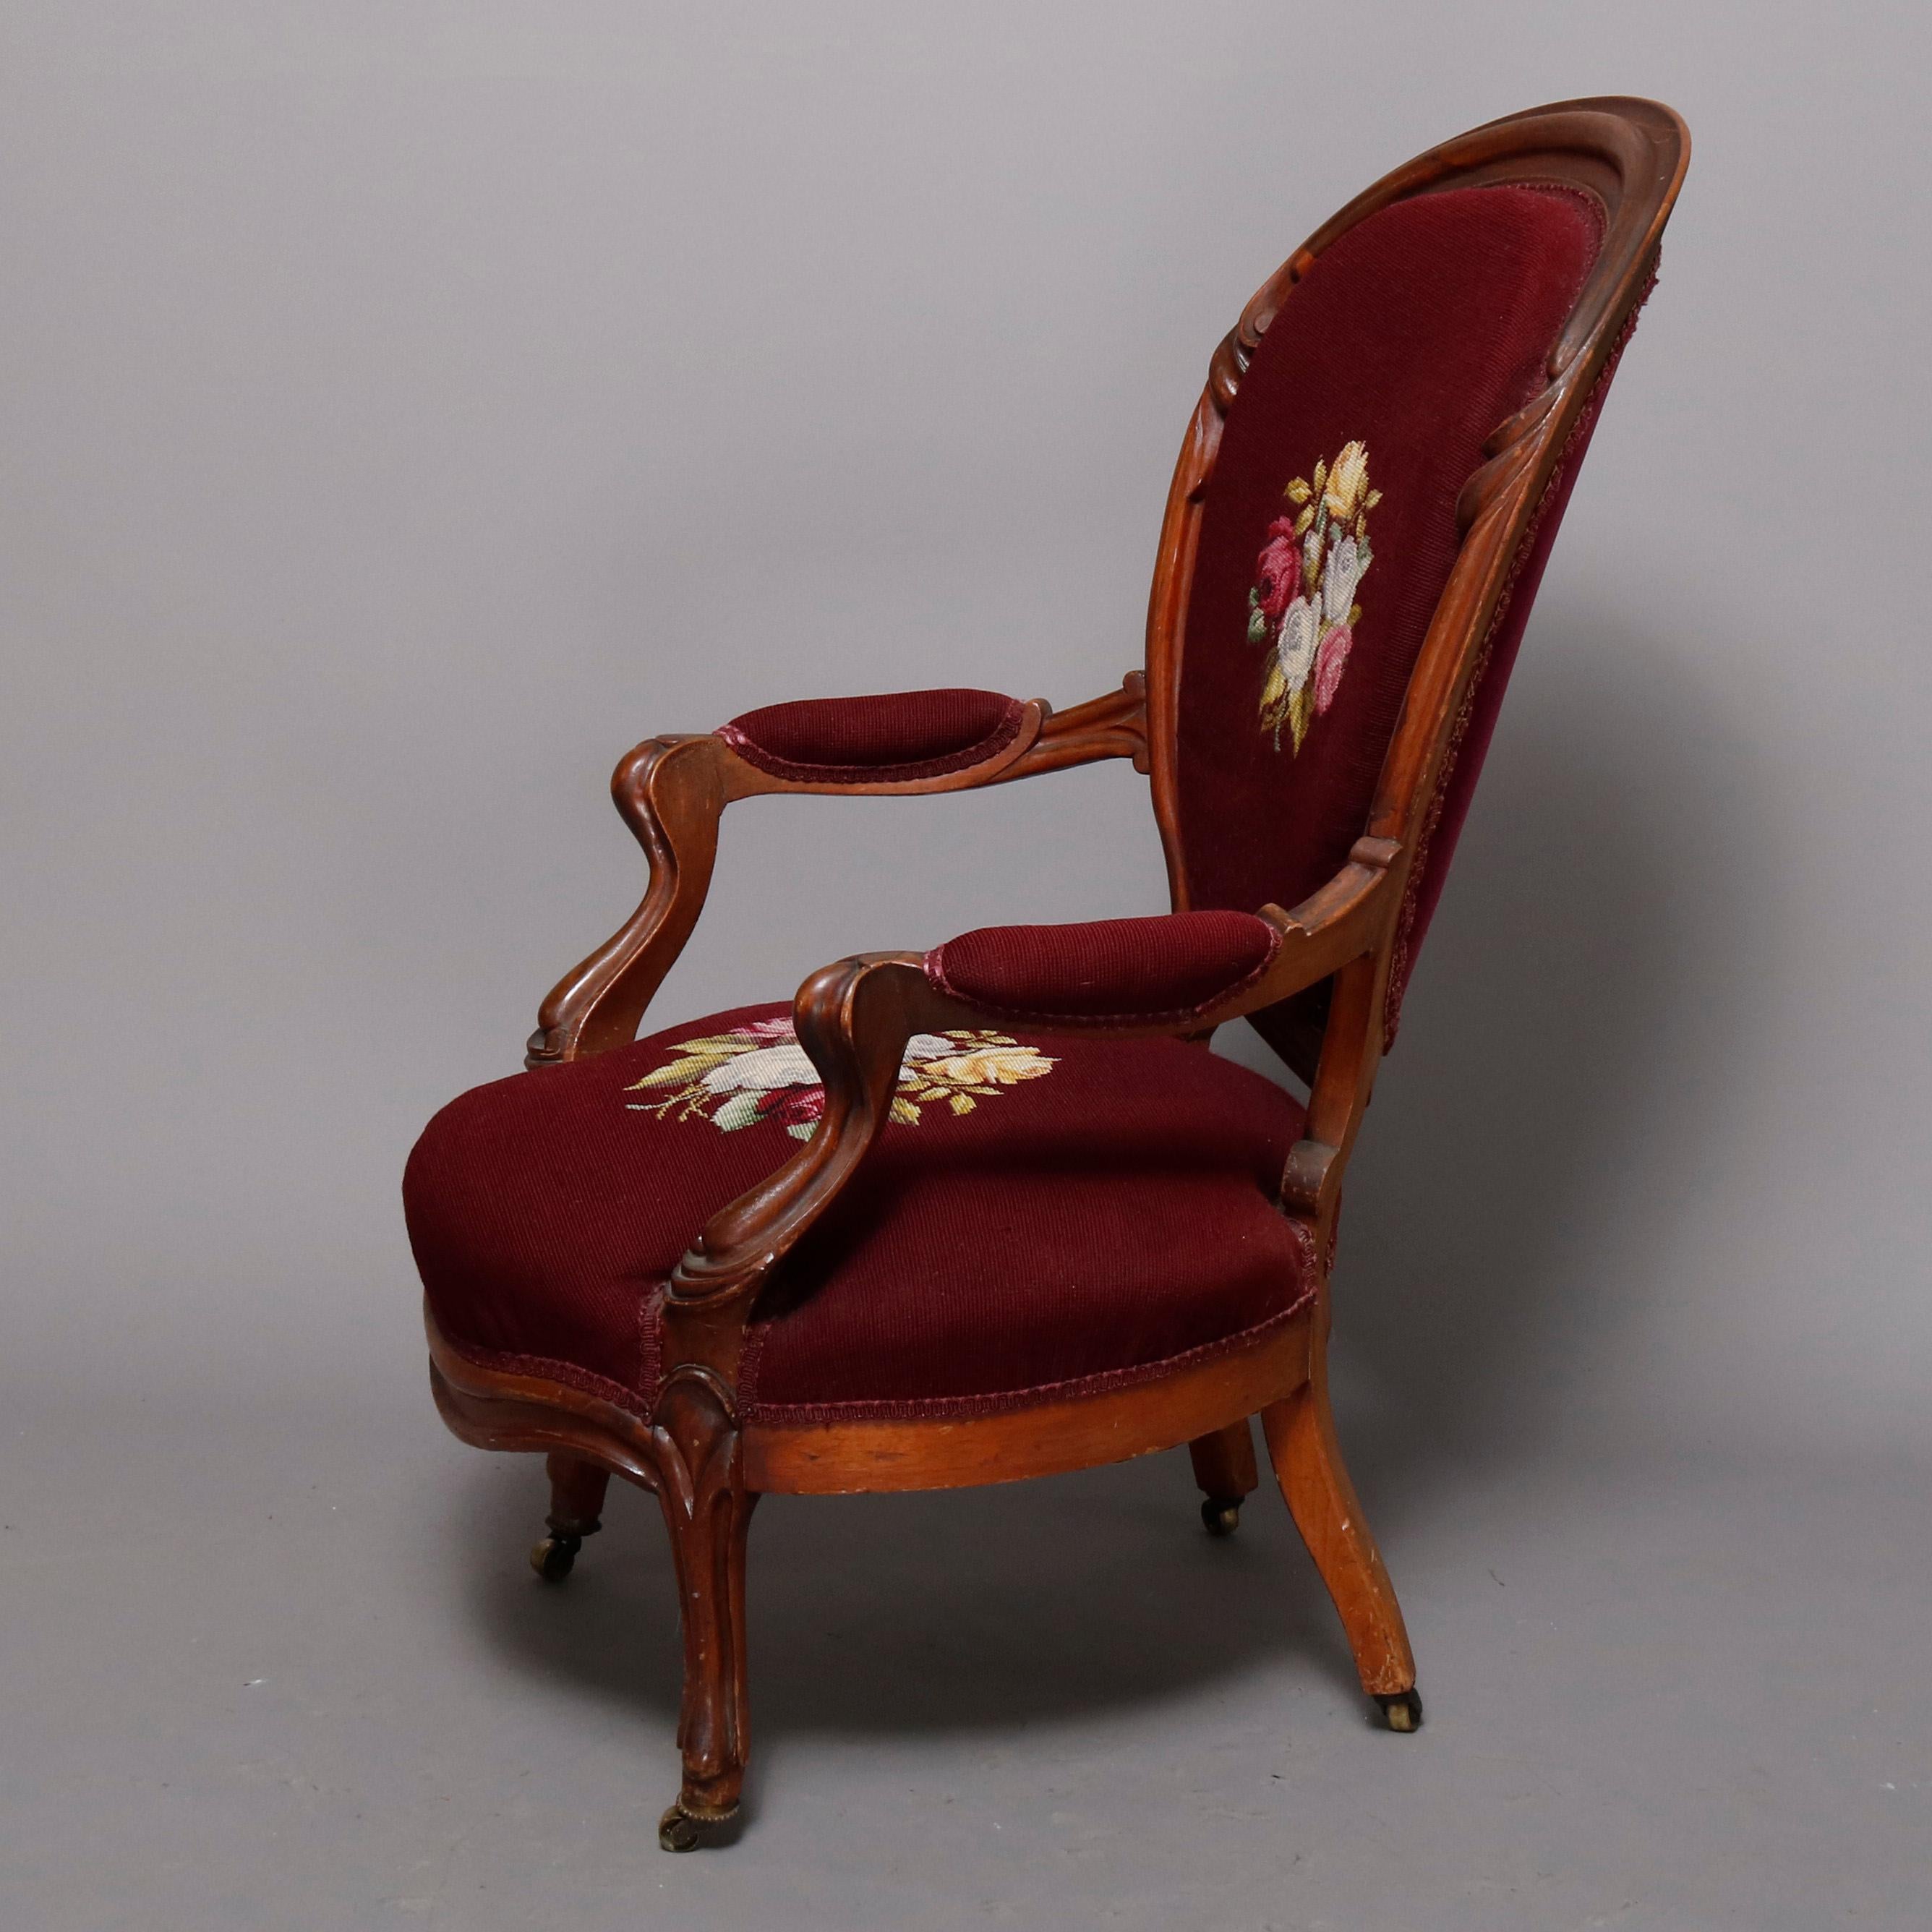 An antique Victorian parlor armchair offers carved walnut frame with balloon back having flanking foliate elements framing needlepoint back with central floral reserve surmounting shaped seat with matching needlepoint cushion, covered and carved